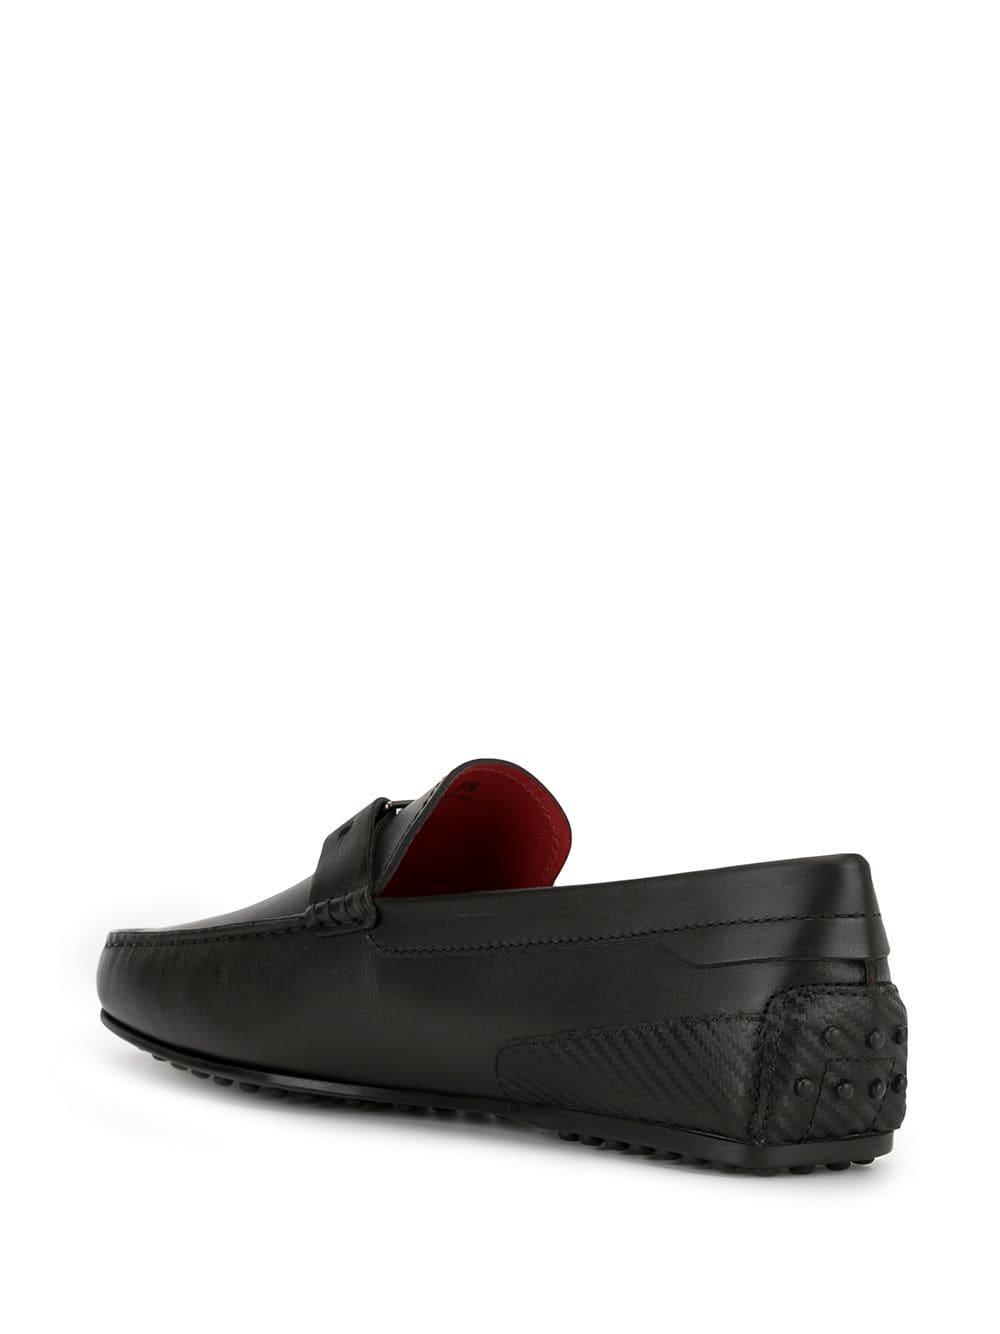 Tod's Leather X Ferrari City Gommino Loafers in Black for Men - Lyst